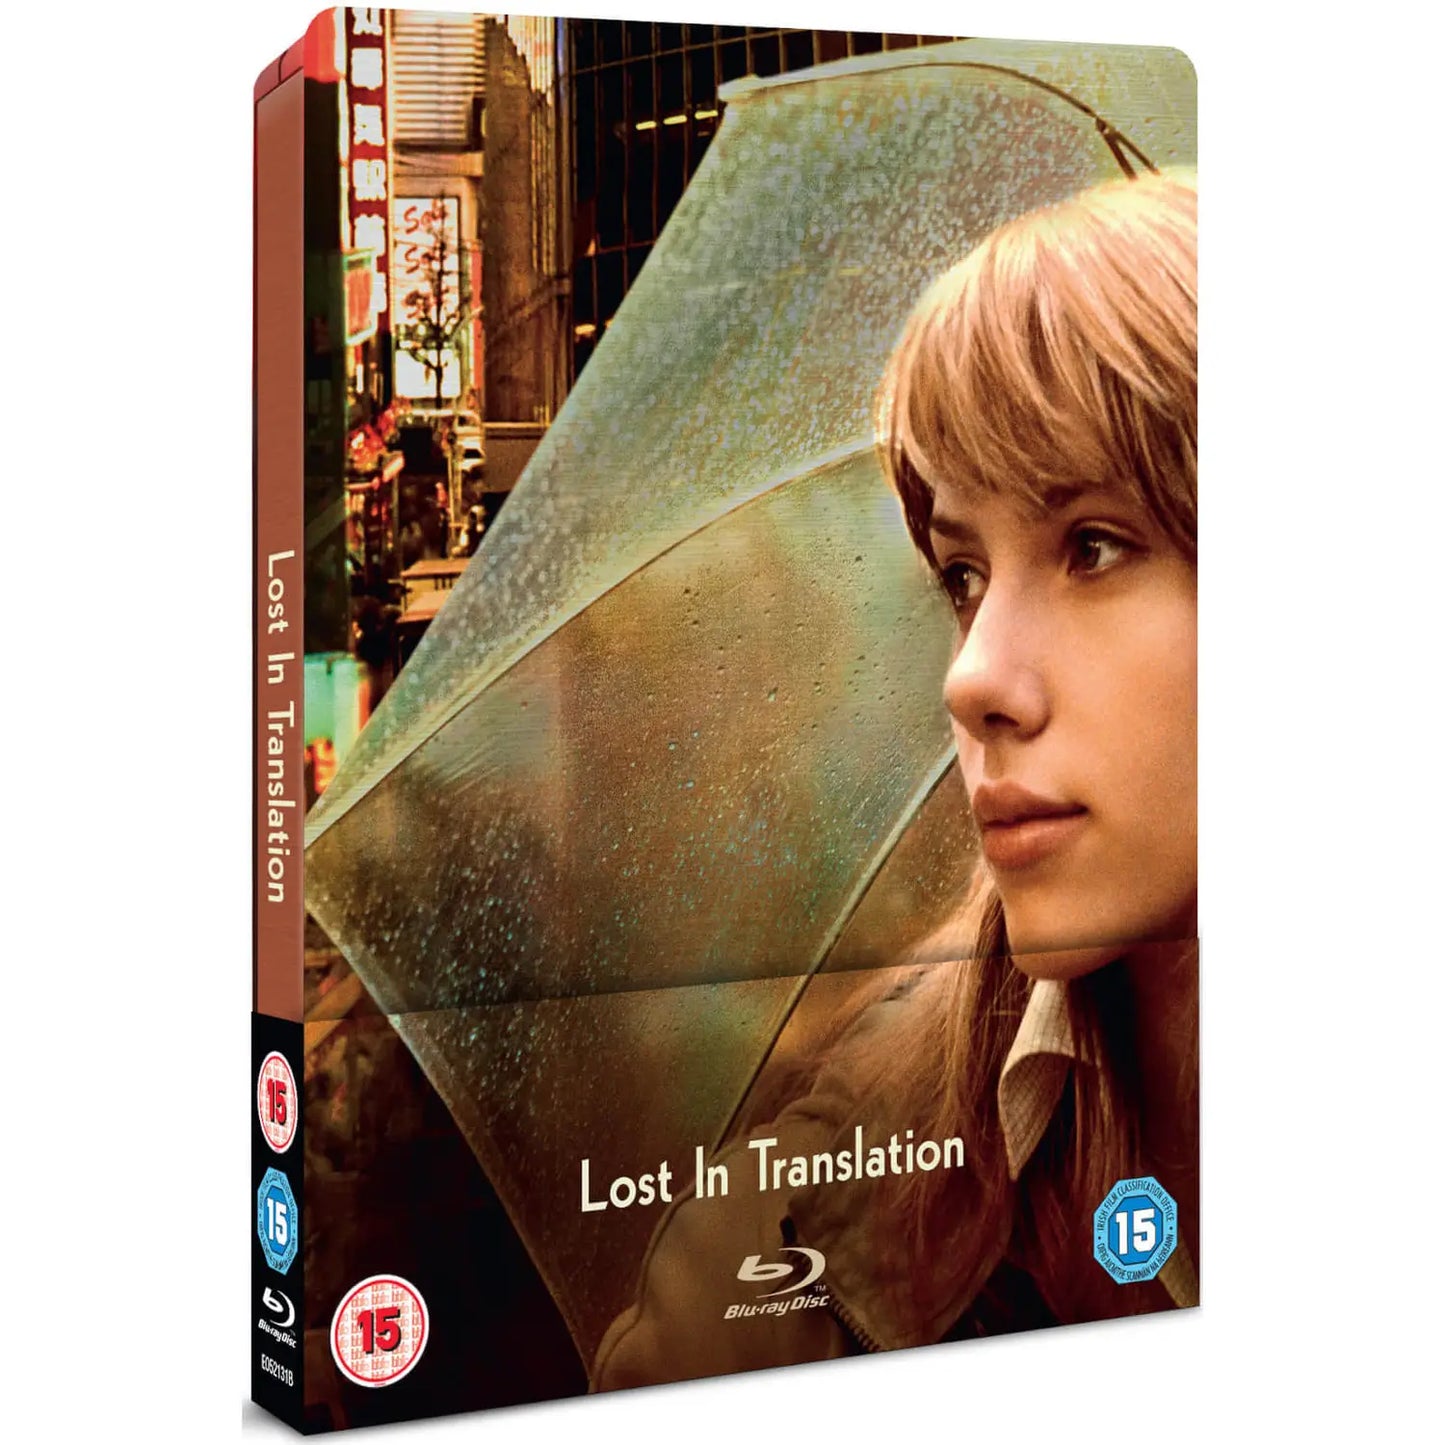 Lost In Translation Blu-ray Steelbook Zavvi Exclusive Limited Edition